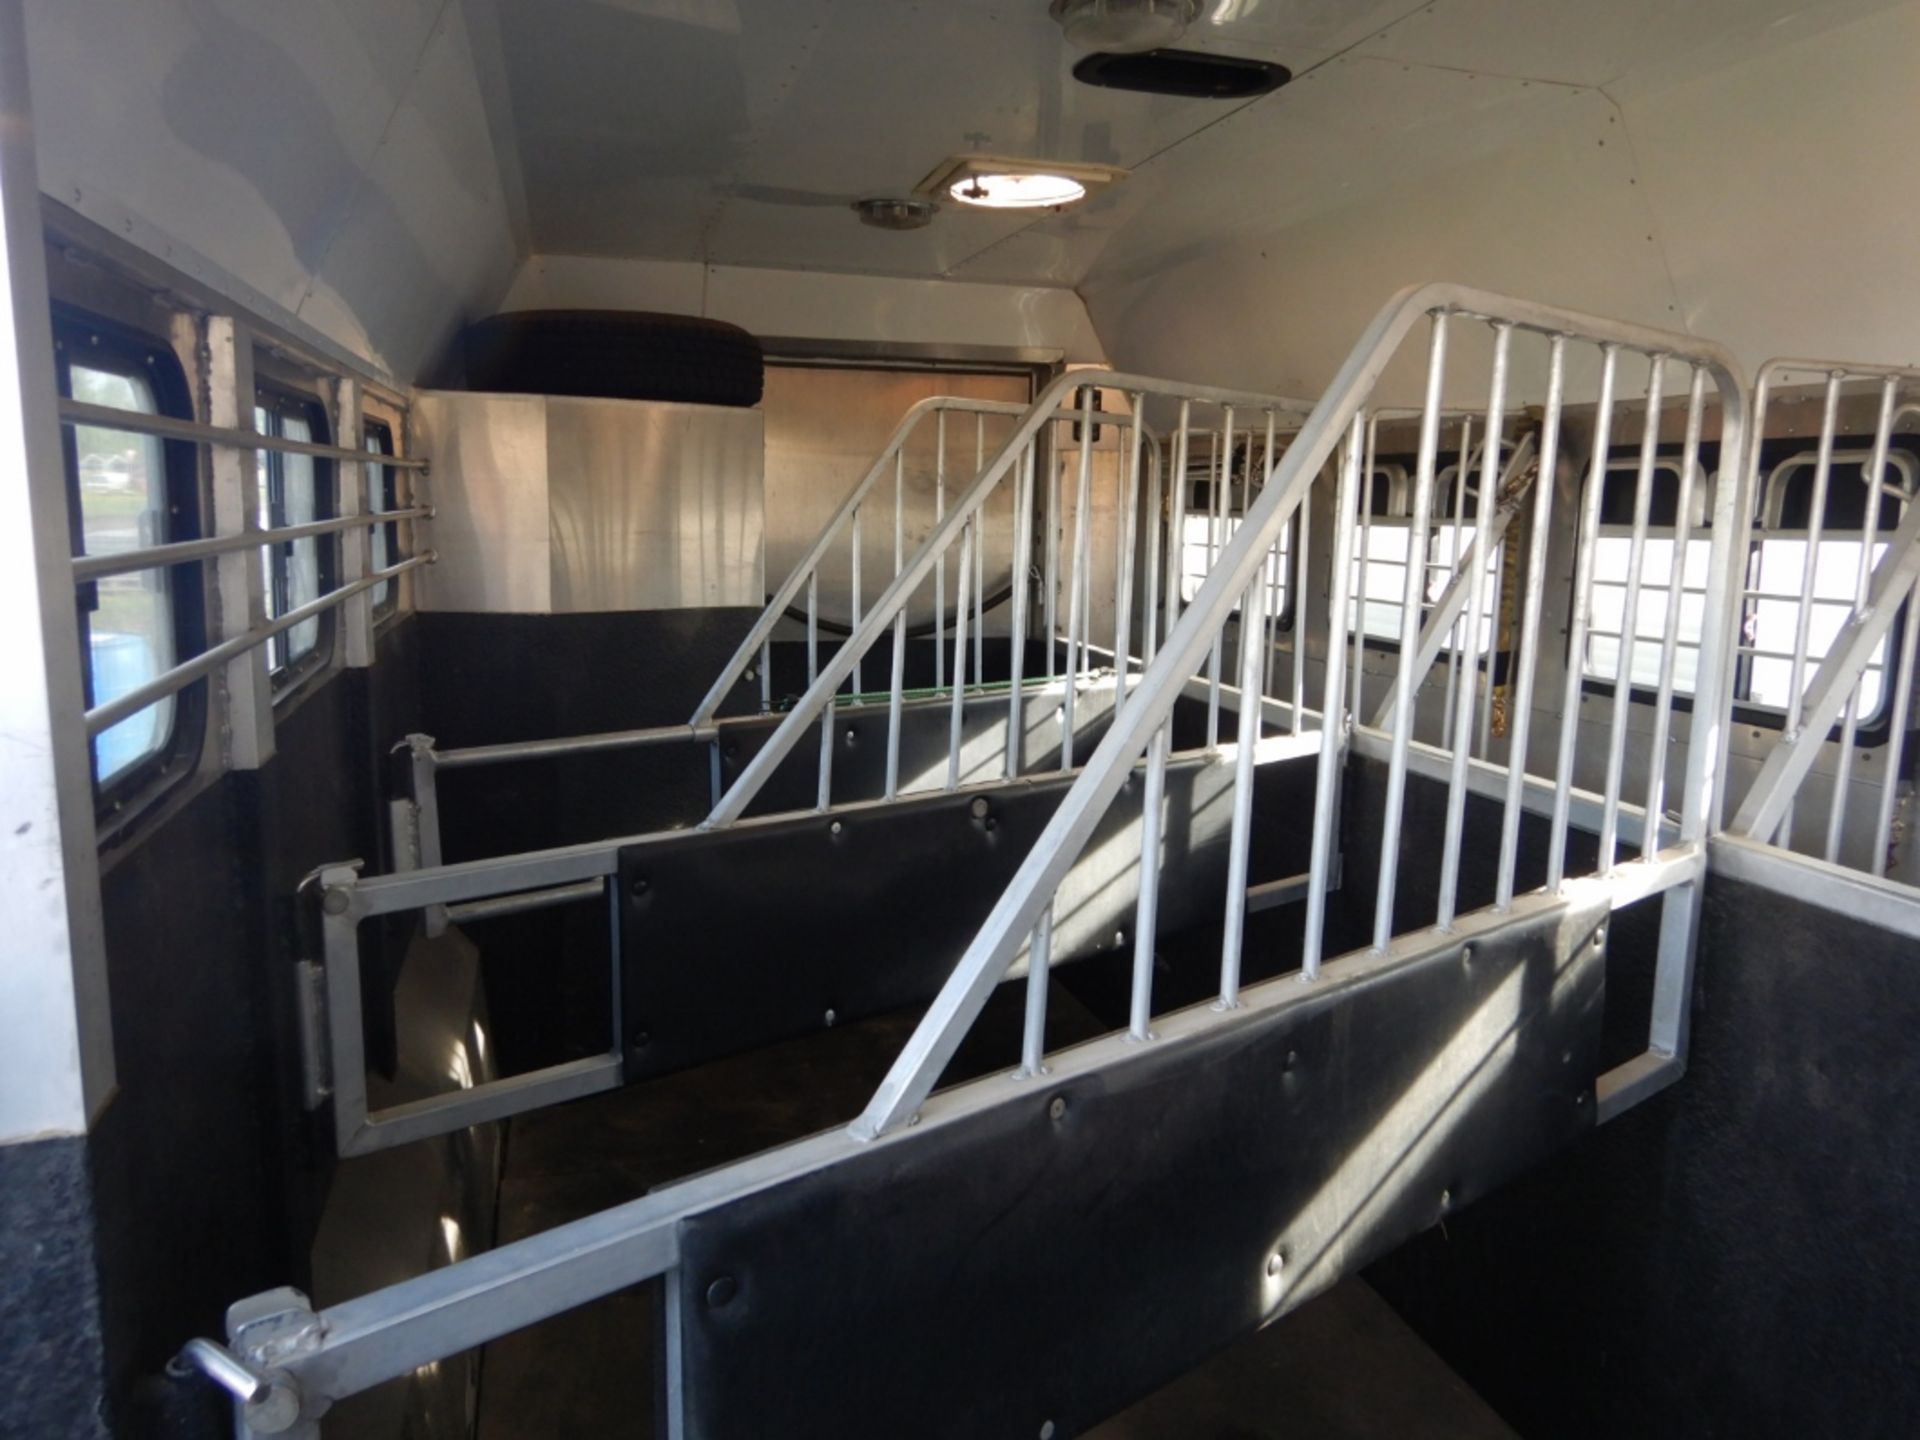 2003 ROCKIES CONVERSIONS SS 4-HORSE RH ANGLE HAUL TRAILER W/LIVING QUARTERS, A/C, INTEGRATED GEN SET - Image 4 of 22